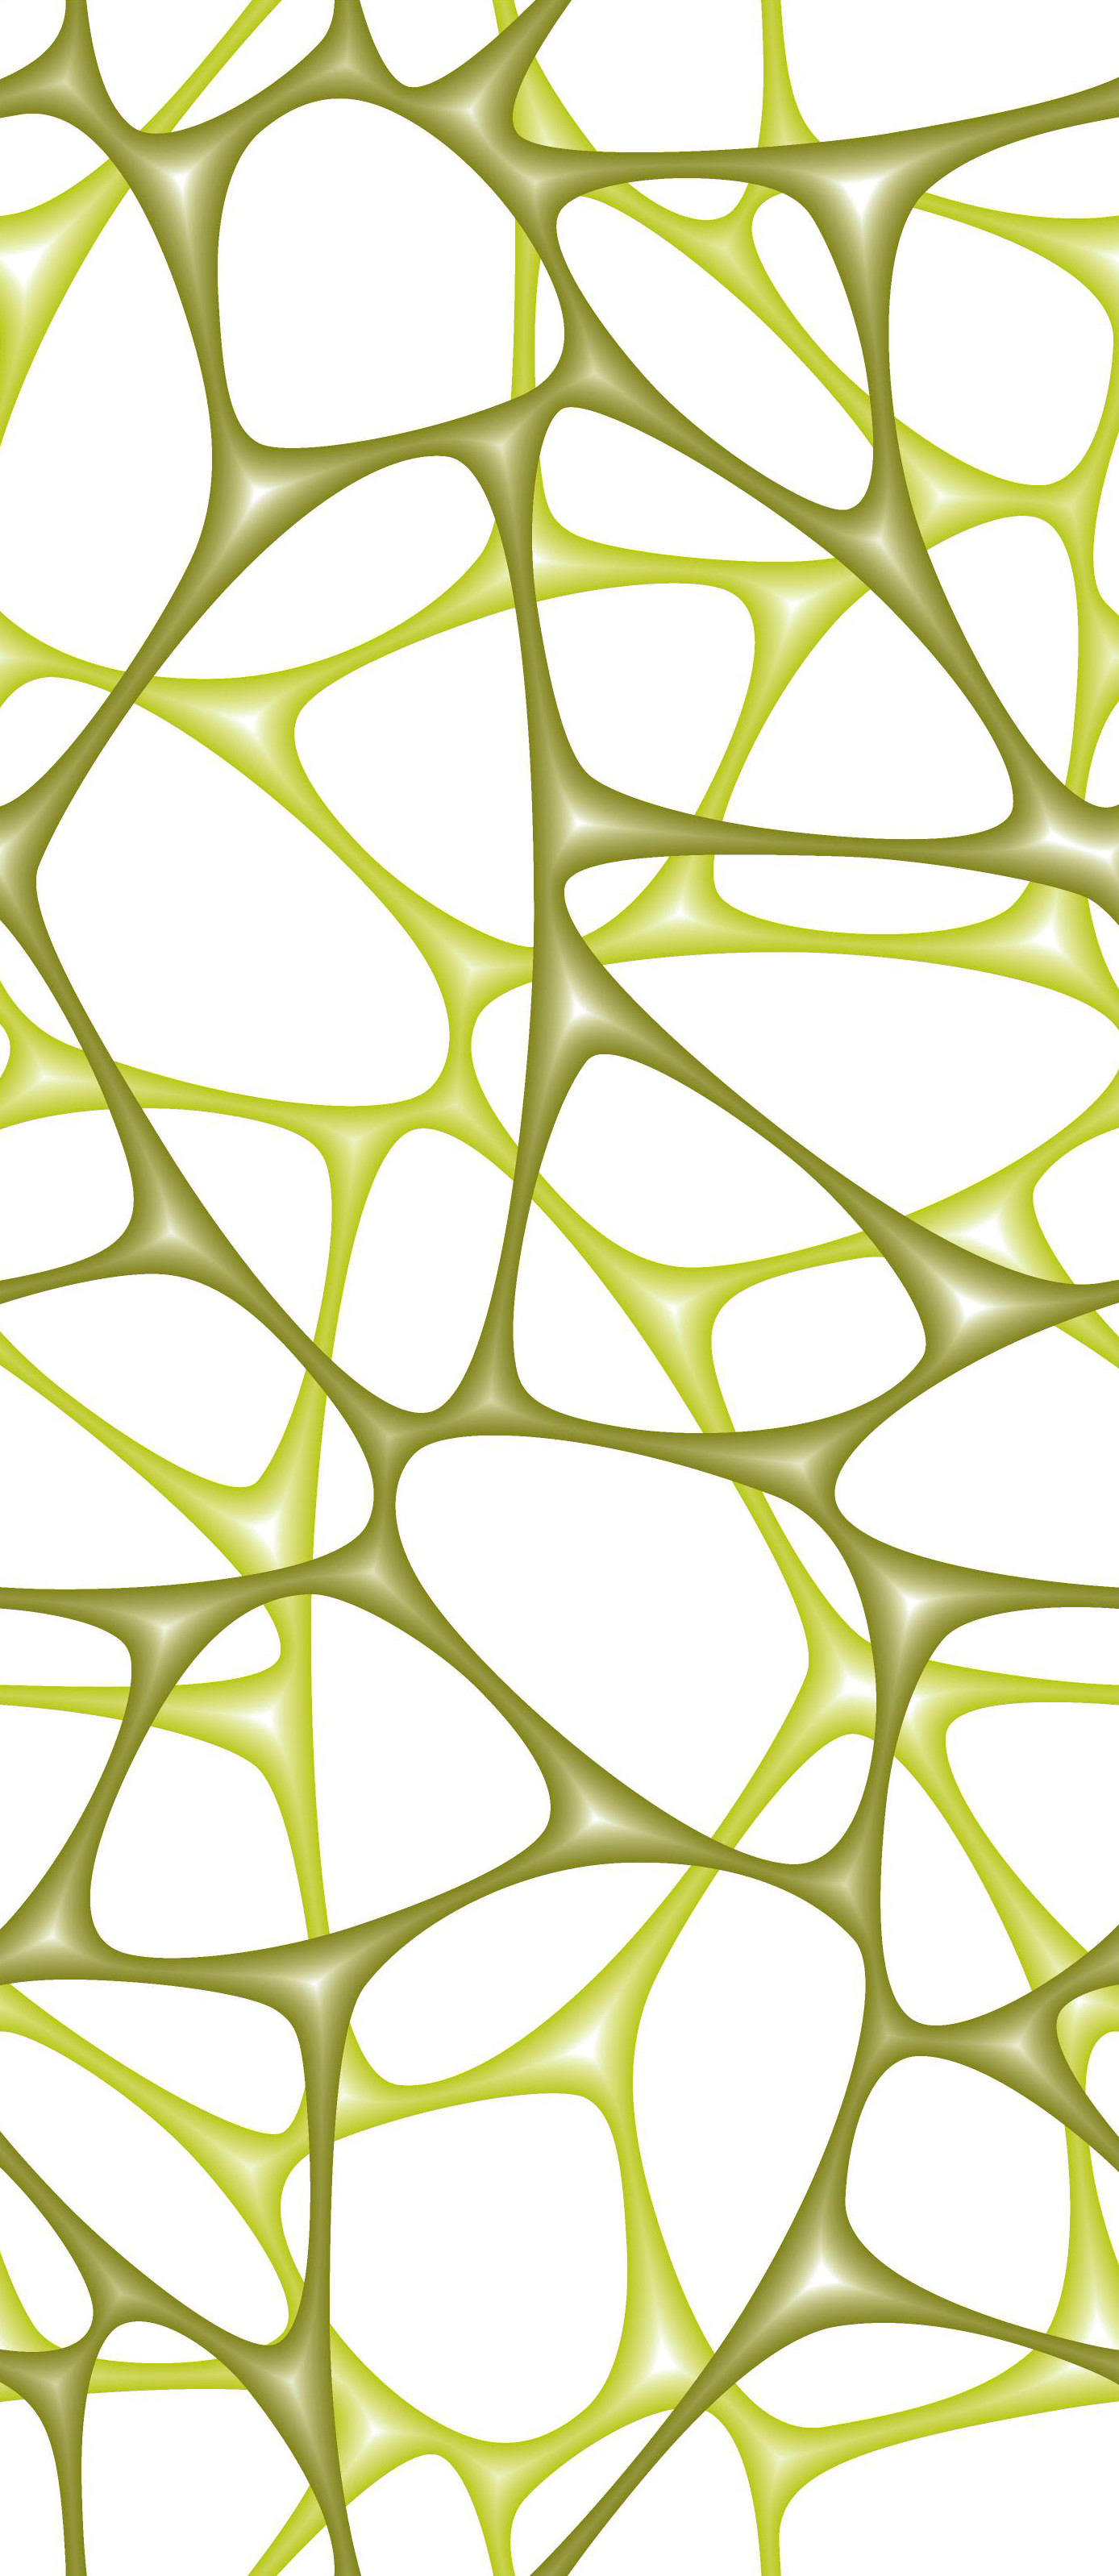 1388x3196 Micro Structure - Green/Lime Arctic White, wallpaper by Lars Contzen